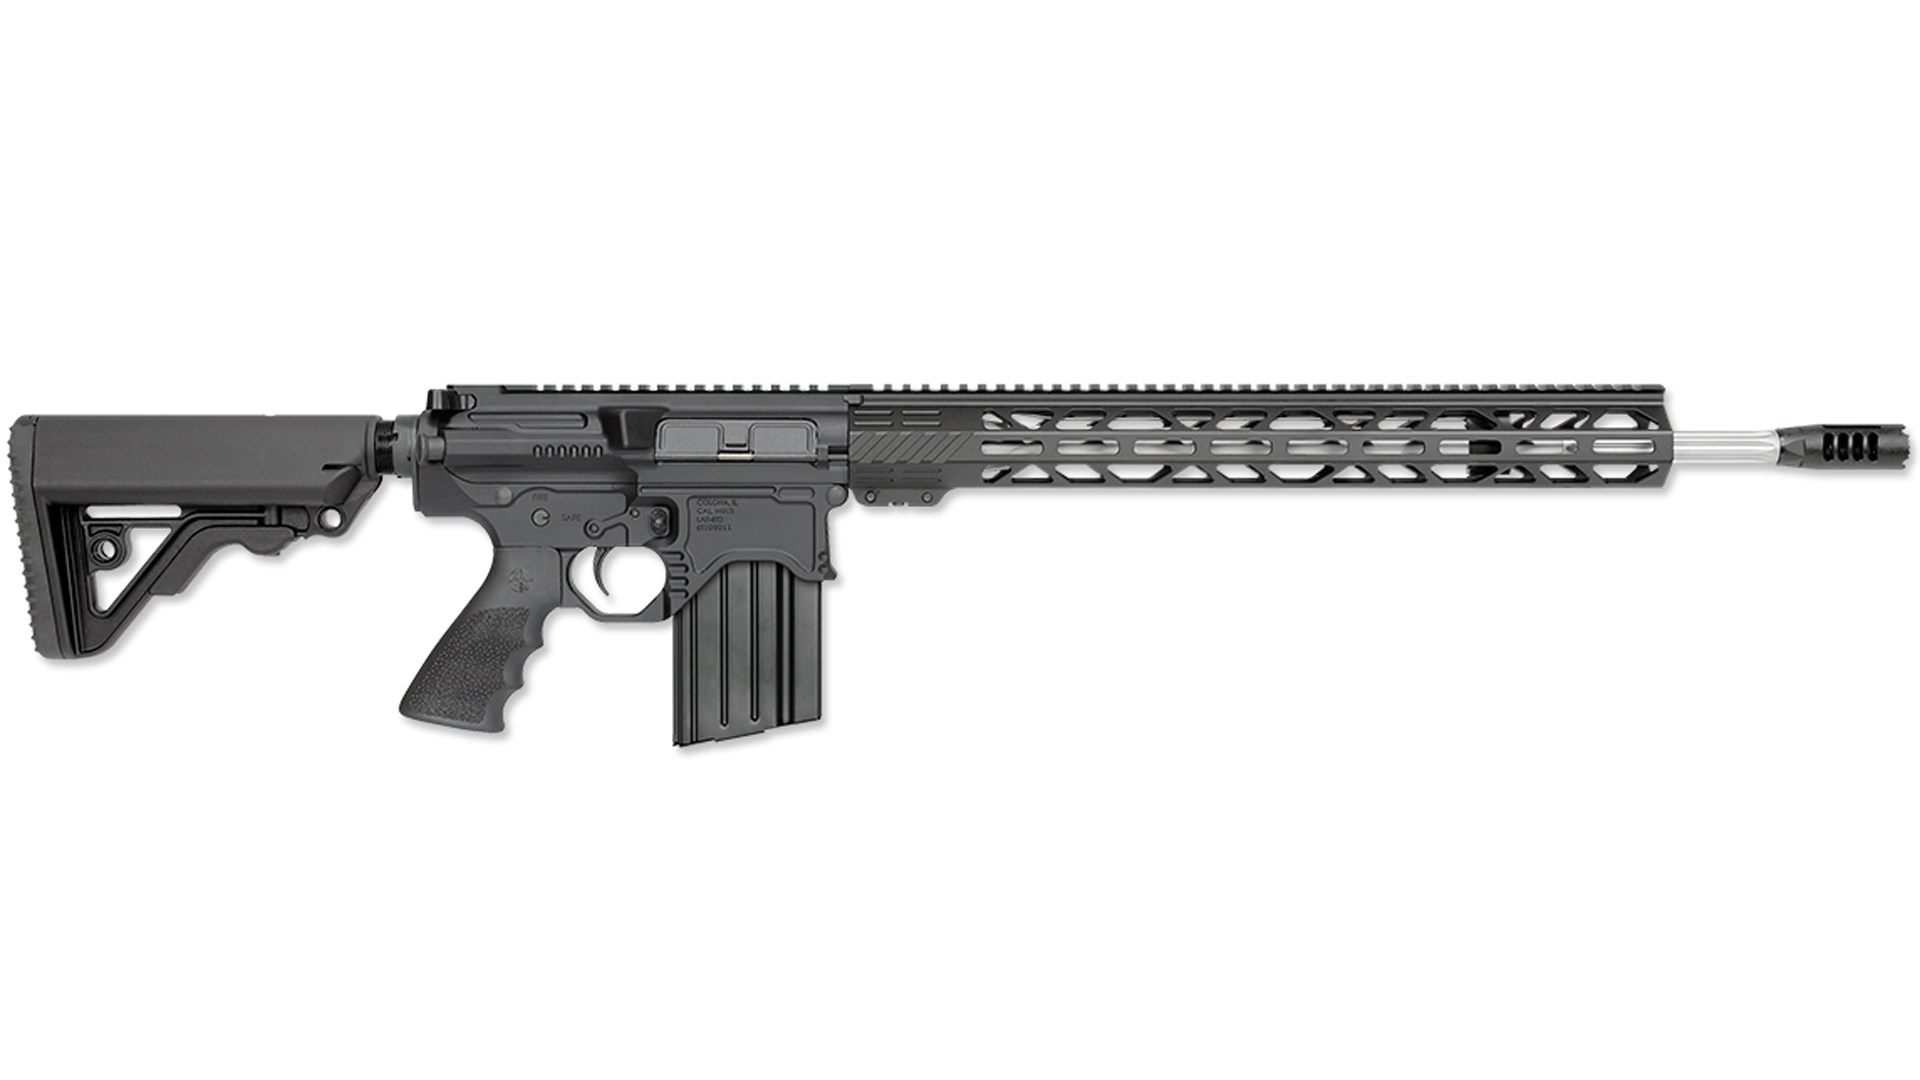 Right side of the Rock River Arms BT3 Predator HP 65C semi-automatic rifle.